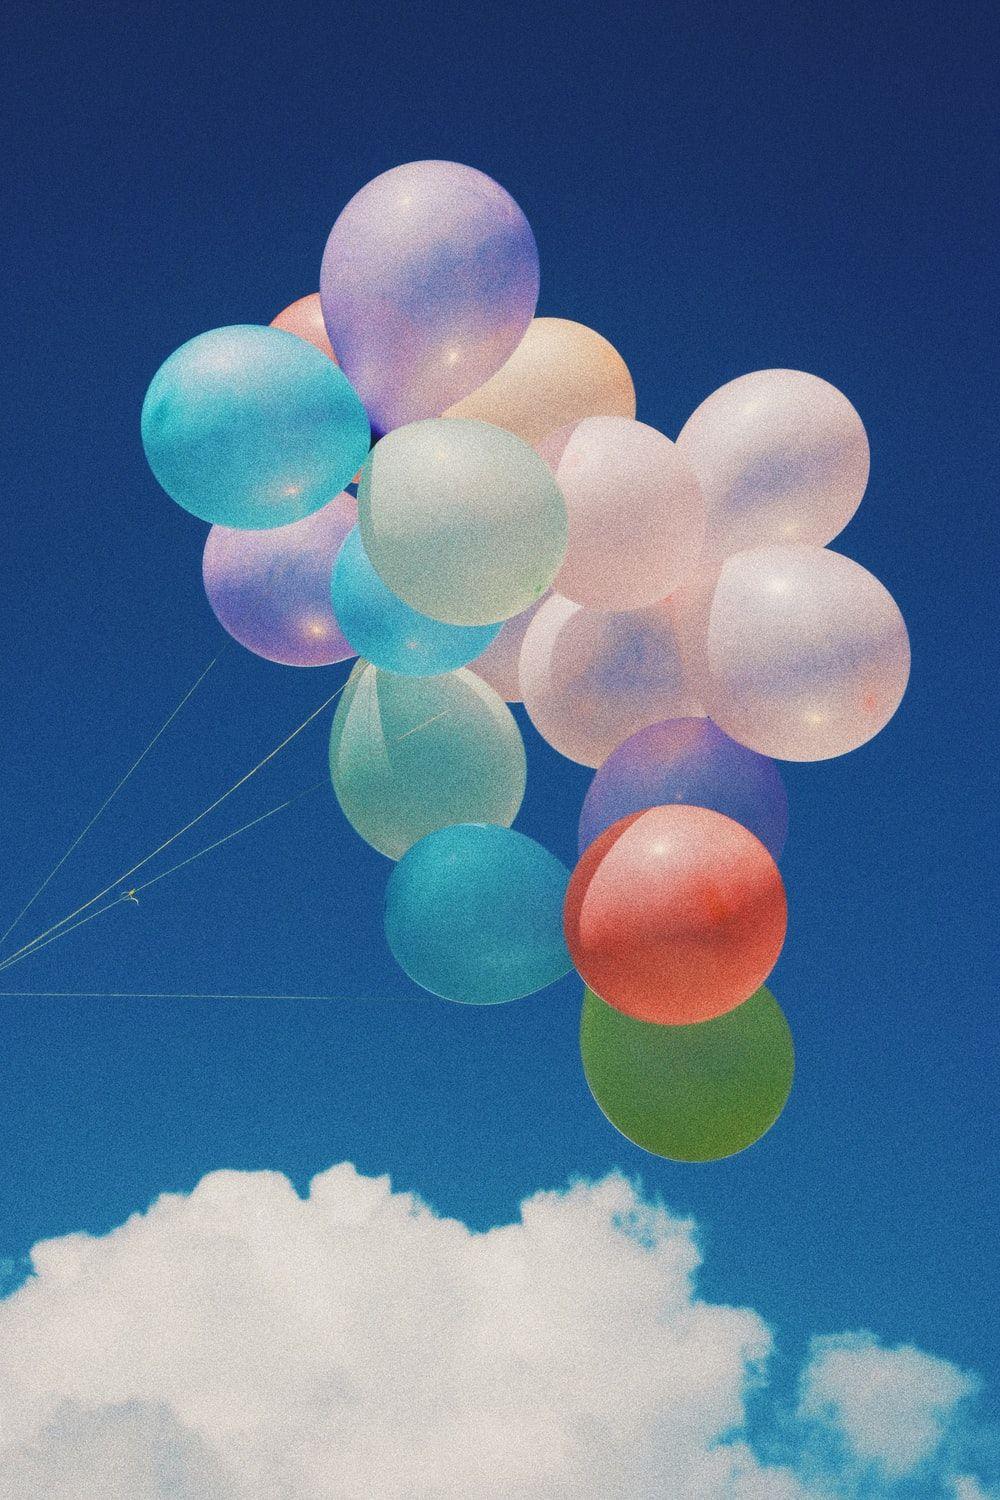 Wallpaper Red Green and Blue Balloons Background  Download Free Image